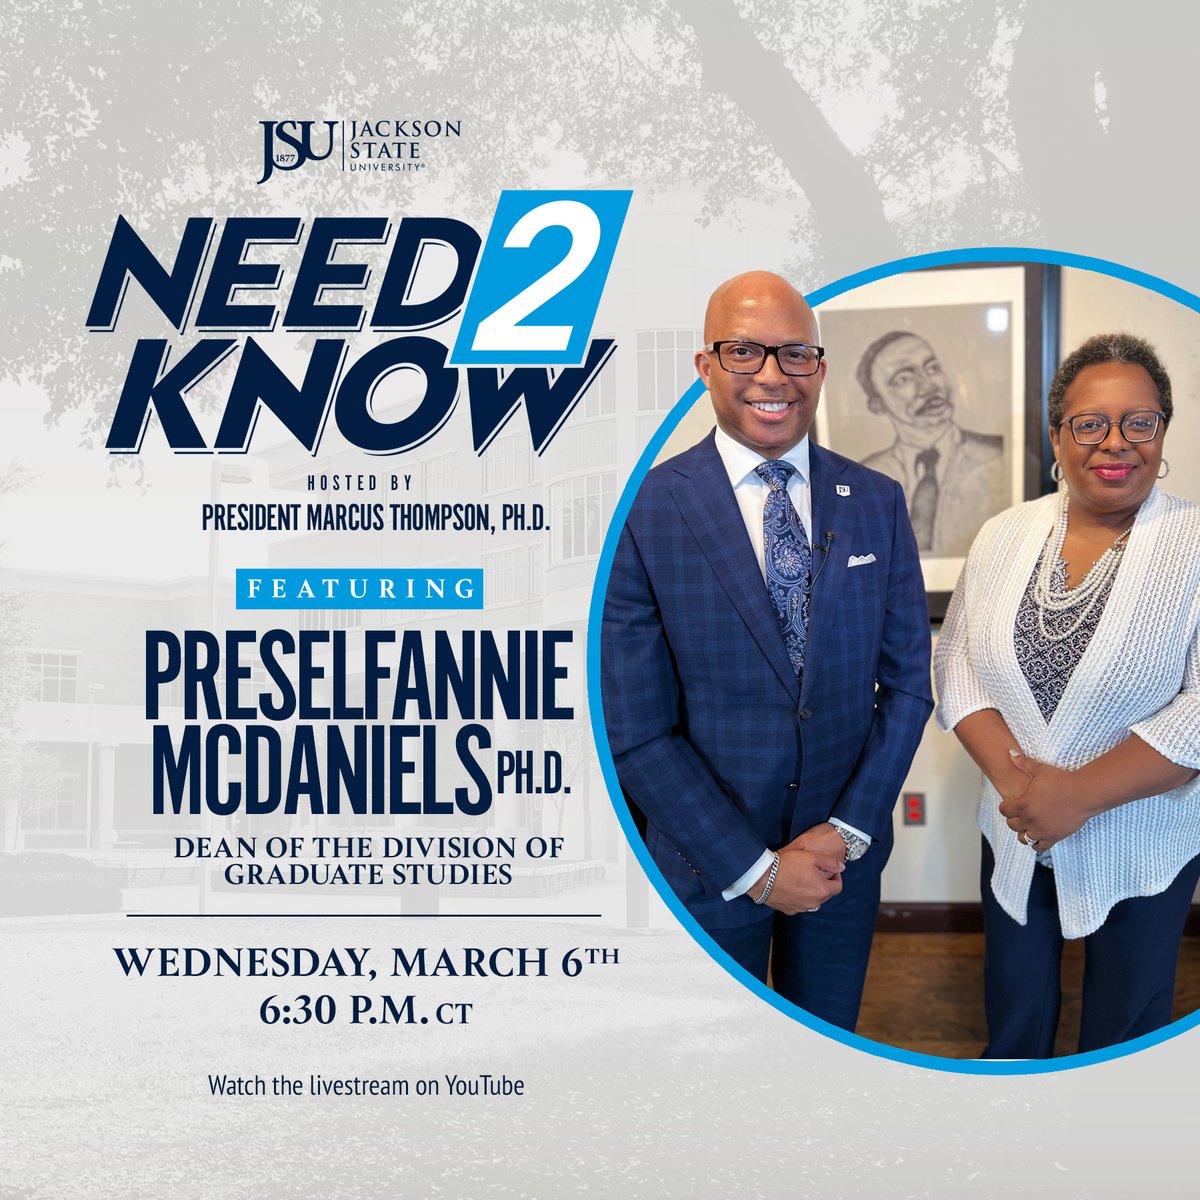 Reminder: Join us for the next edition of JSU Need 2 Know as @JSUPrez13 chats with Dean Preselfannie McDaniels, Ph.D. Tune in for the insightful conversation TONIGHT, March 6, at 6:30 pm CT exclusively on JSU's YouTube channel. #JSUNeed2Know #JSUElevate